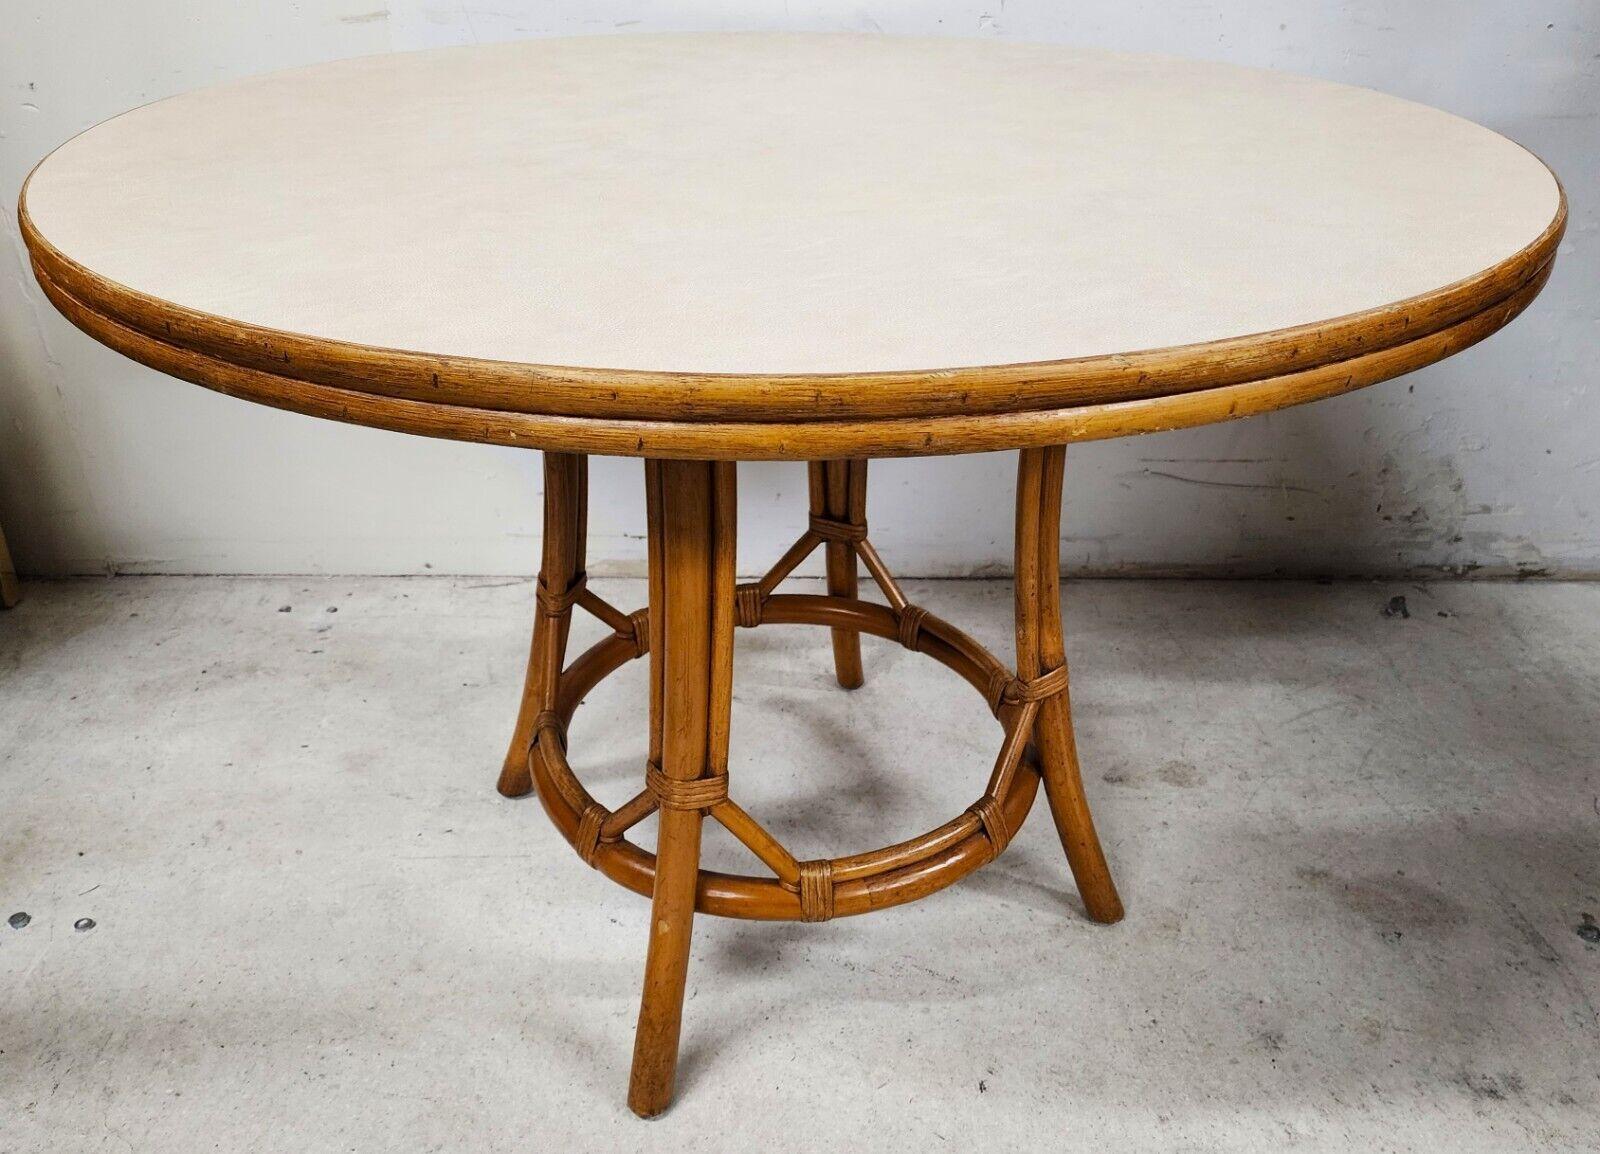 For FULL item description click on CONTINUE READING at the bottom of this page.

Offering One Of Our Recent Palm Beach Estate Fine Furniture Acquisitions Of A

Vintage Bamboo Rattan Old Florida Boho Style Dining Table 
With a Mica top which is